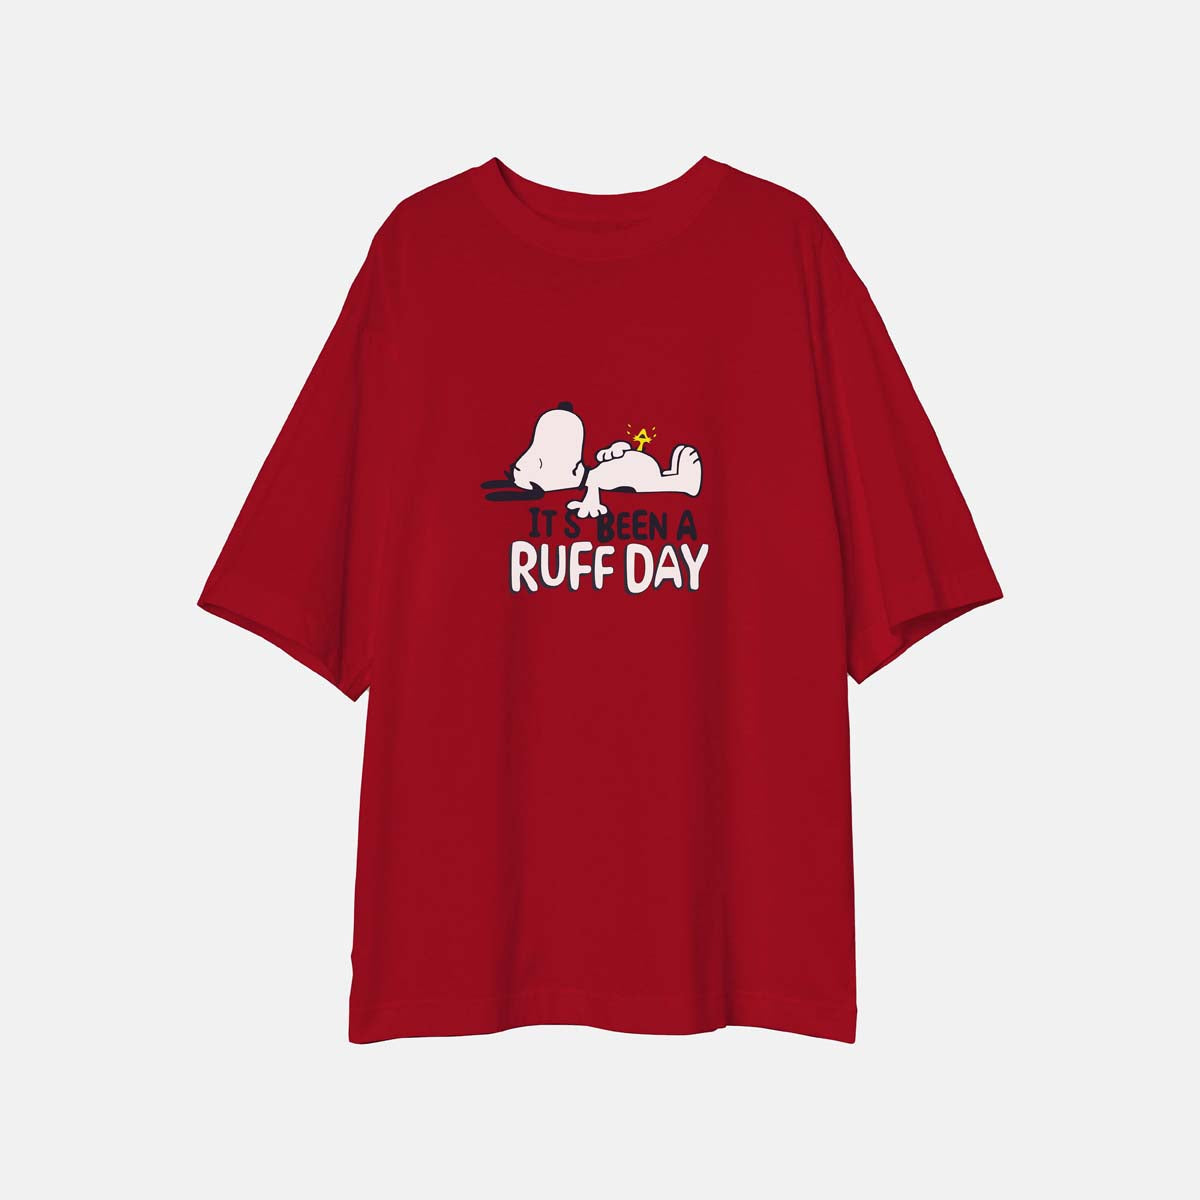 Ruff Day - Printed Oversized Tees